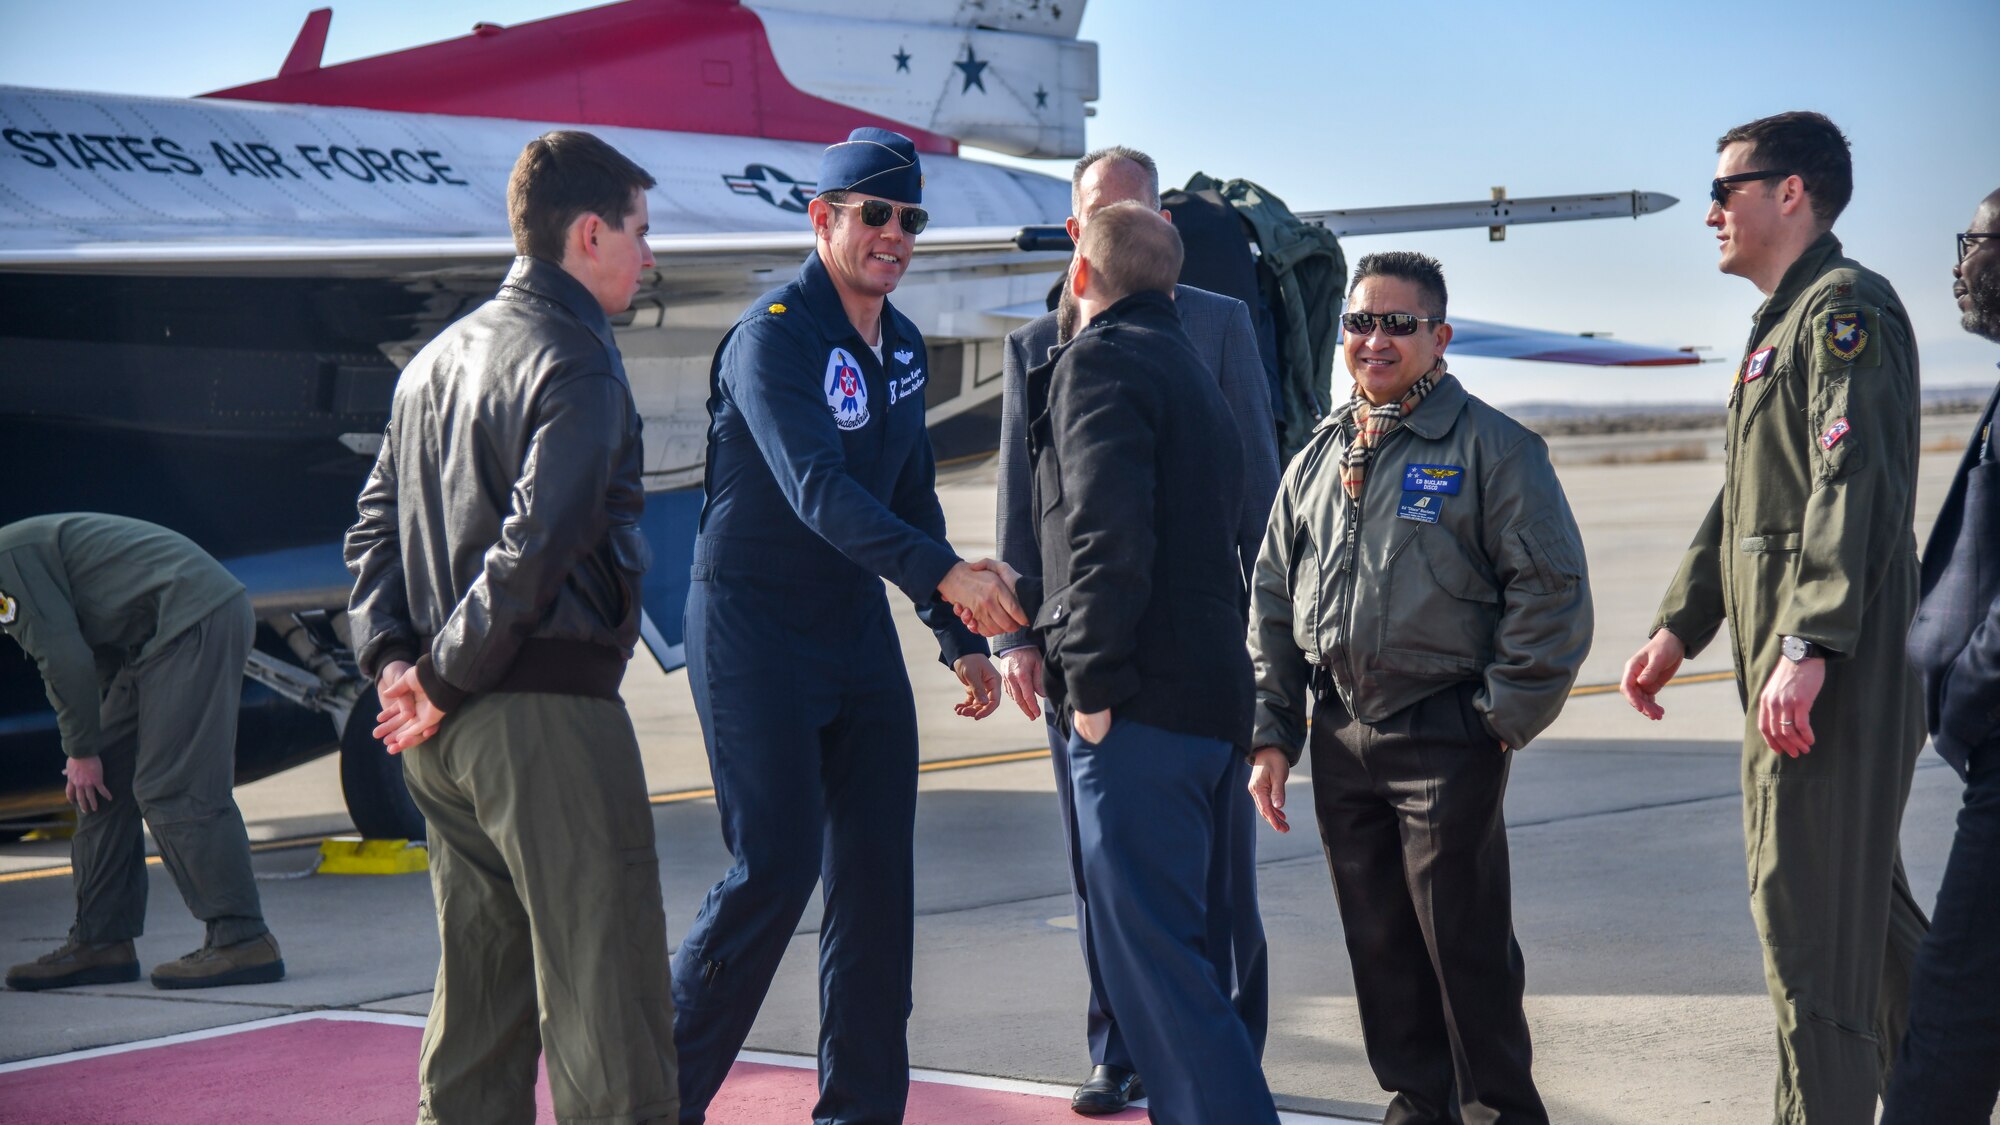 Air Force Thunderbird jet #8 pilot, Maj. Jason Markzon, meets with Aerospace Valley Air Show officials at Edwards Air Force Base, California, Jan. 16. Markzon, the advance pilot and narrator for the Thunderbirds Flight Demonstration Squadron, visited different base facilities at Edwards to conduct a site survey ahead of their performance at the 2020 Aerospace Valley Air Show, Oct. 10-11. (Air Force photo by Giancarlo Casem)